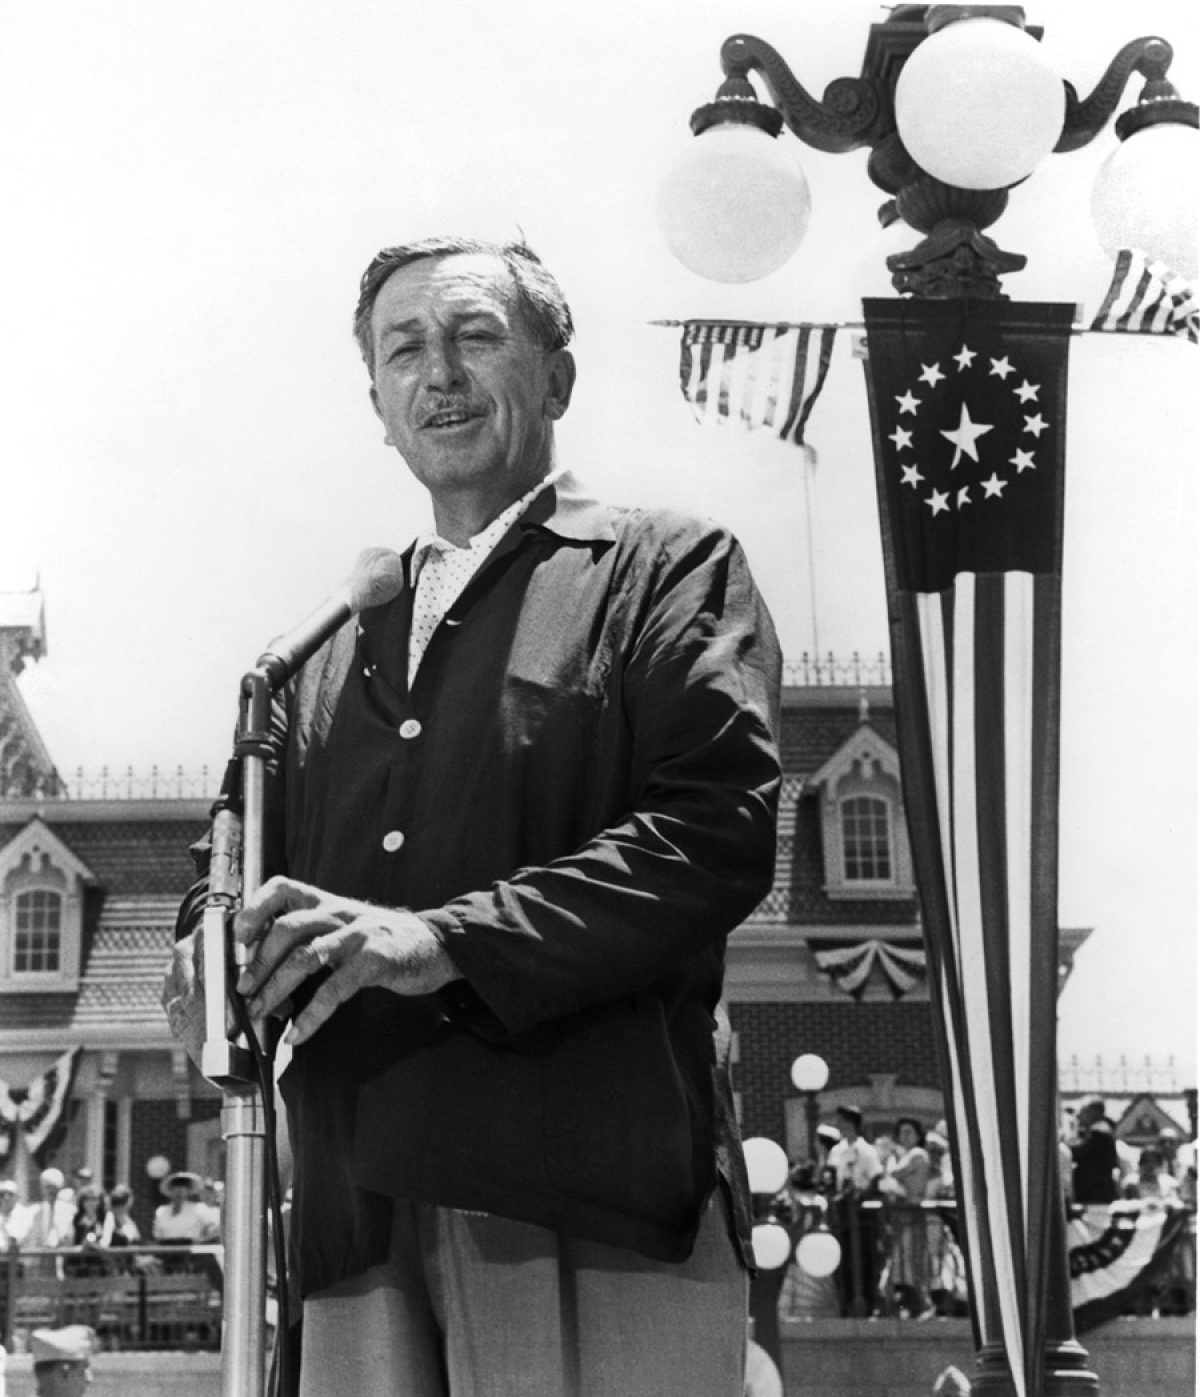 Disneyland will never be completed. It will continue to grow as long as there is imagination left in the world.